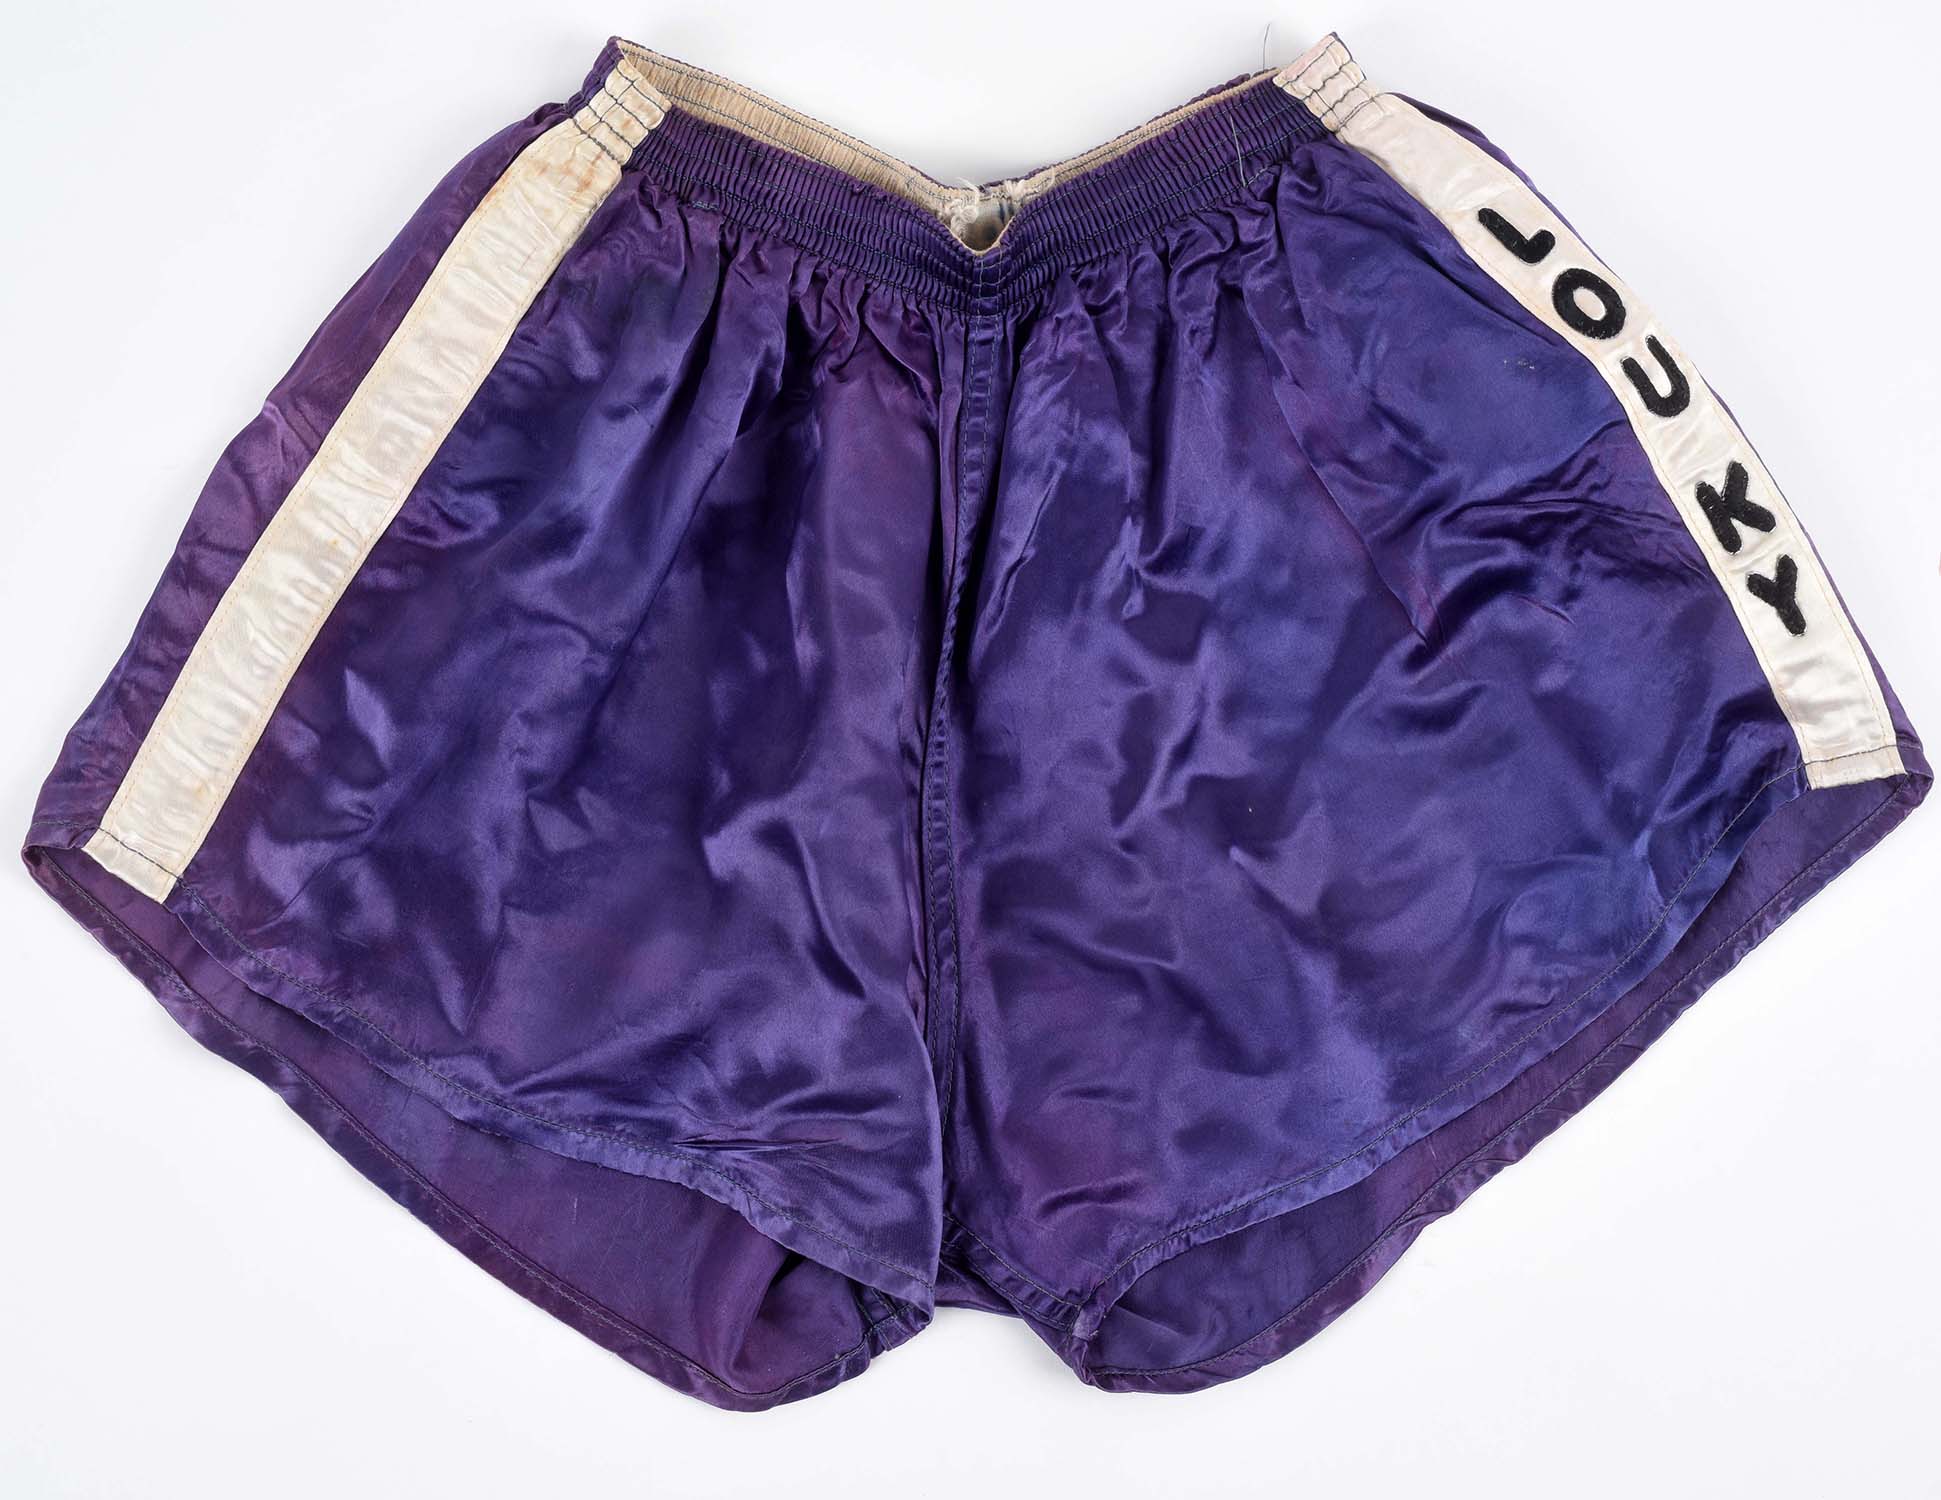 Cassius Clay Earliest Known Worn Training Trunks, estimated at $20,000-40,000.